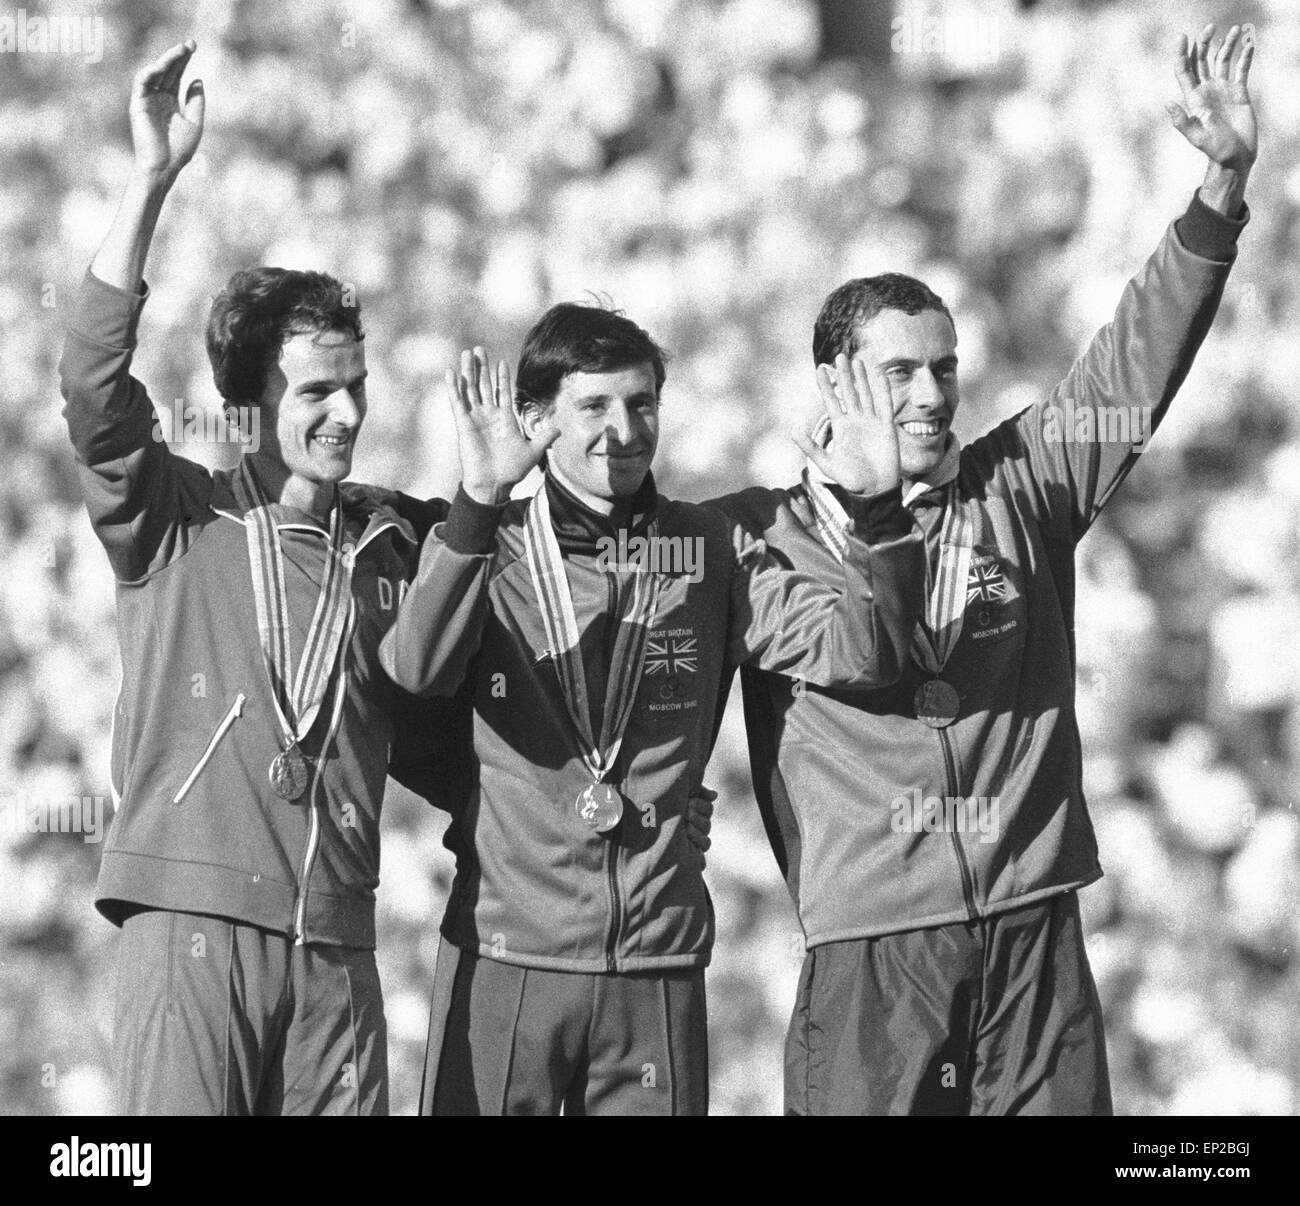 Seb Coe winner of the 1500 metre at the 1980 Moscow Olympic Games seen here with JŸrgen Straub (left) and Steve Ovett (right) during the medal ceremony at the Olympic stadium. 1st August 1980 Stock Photo